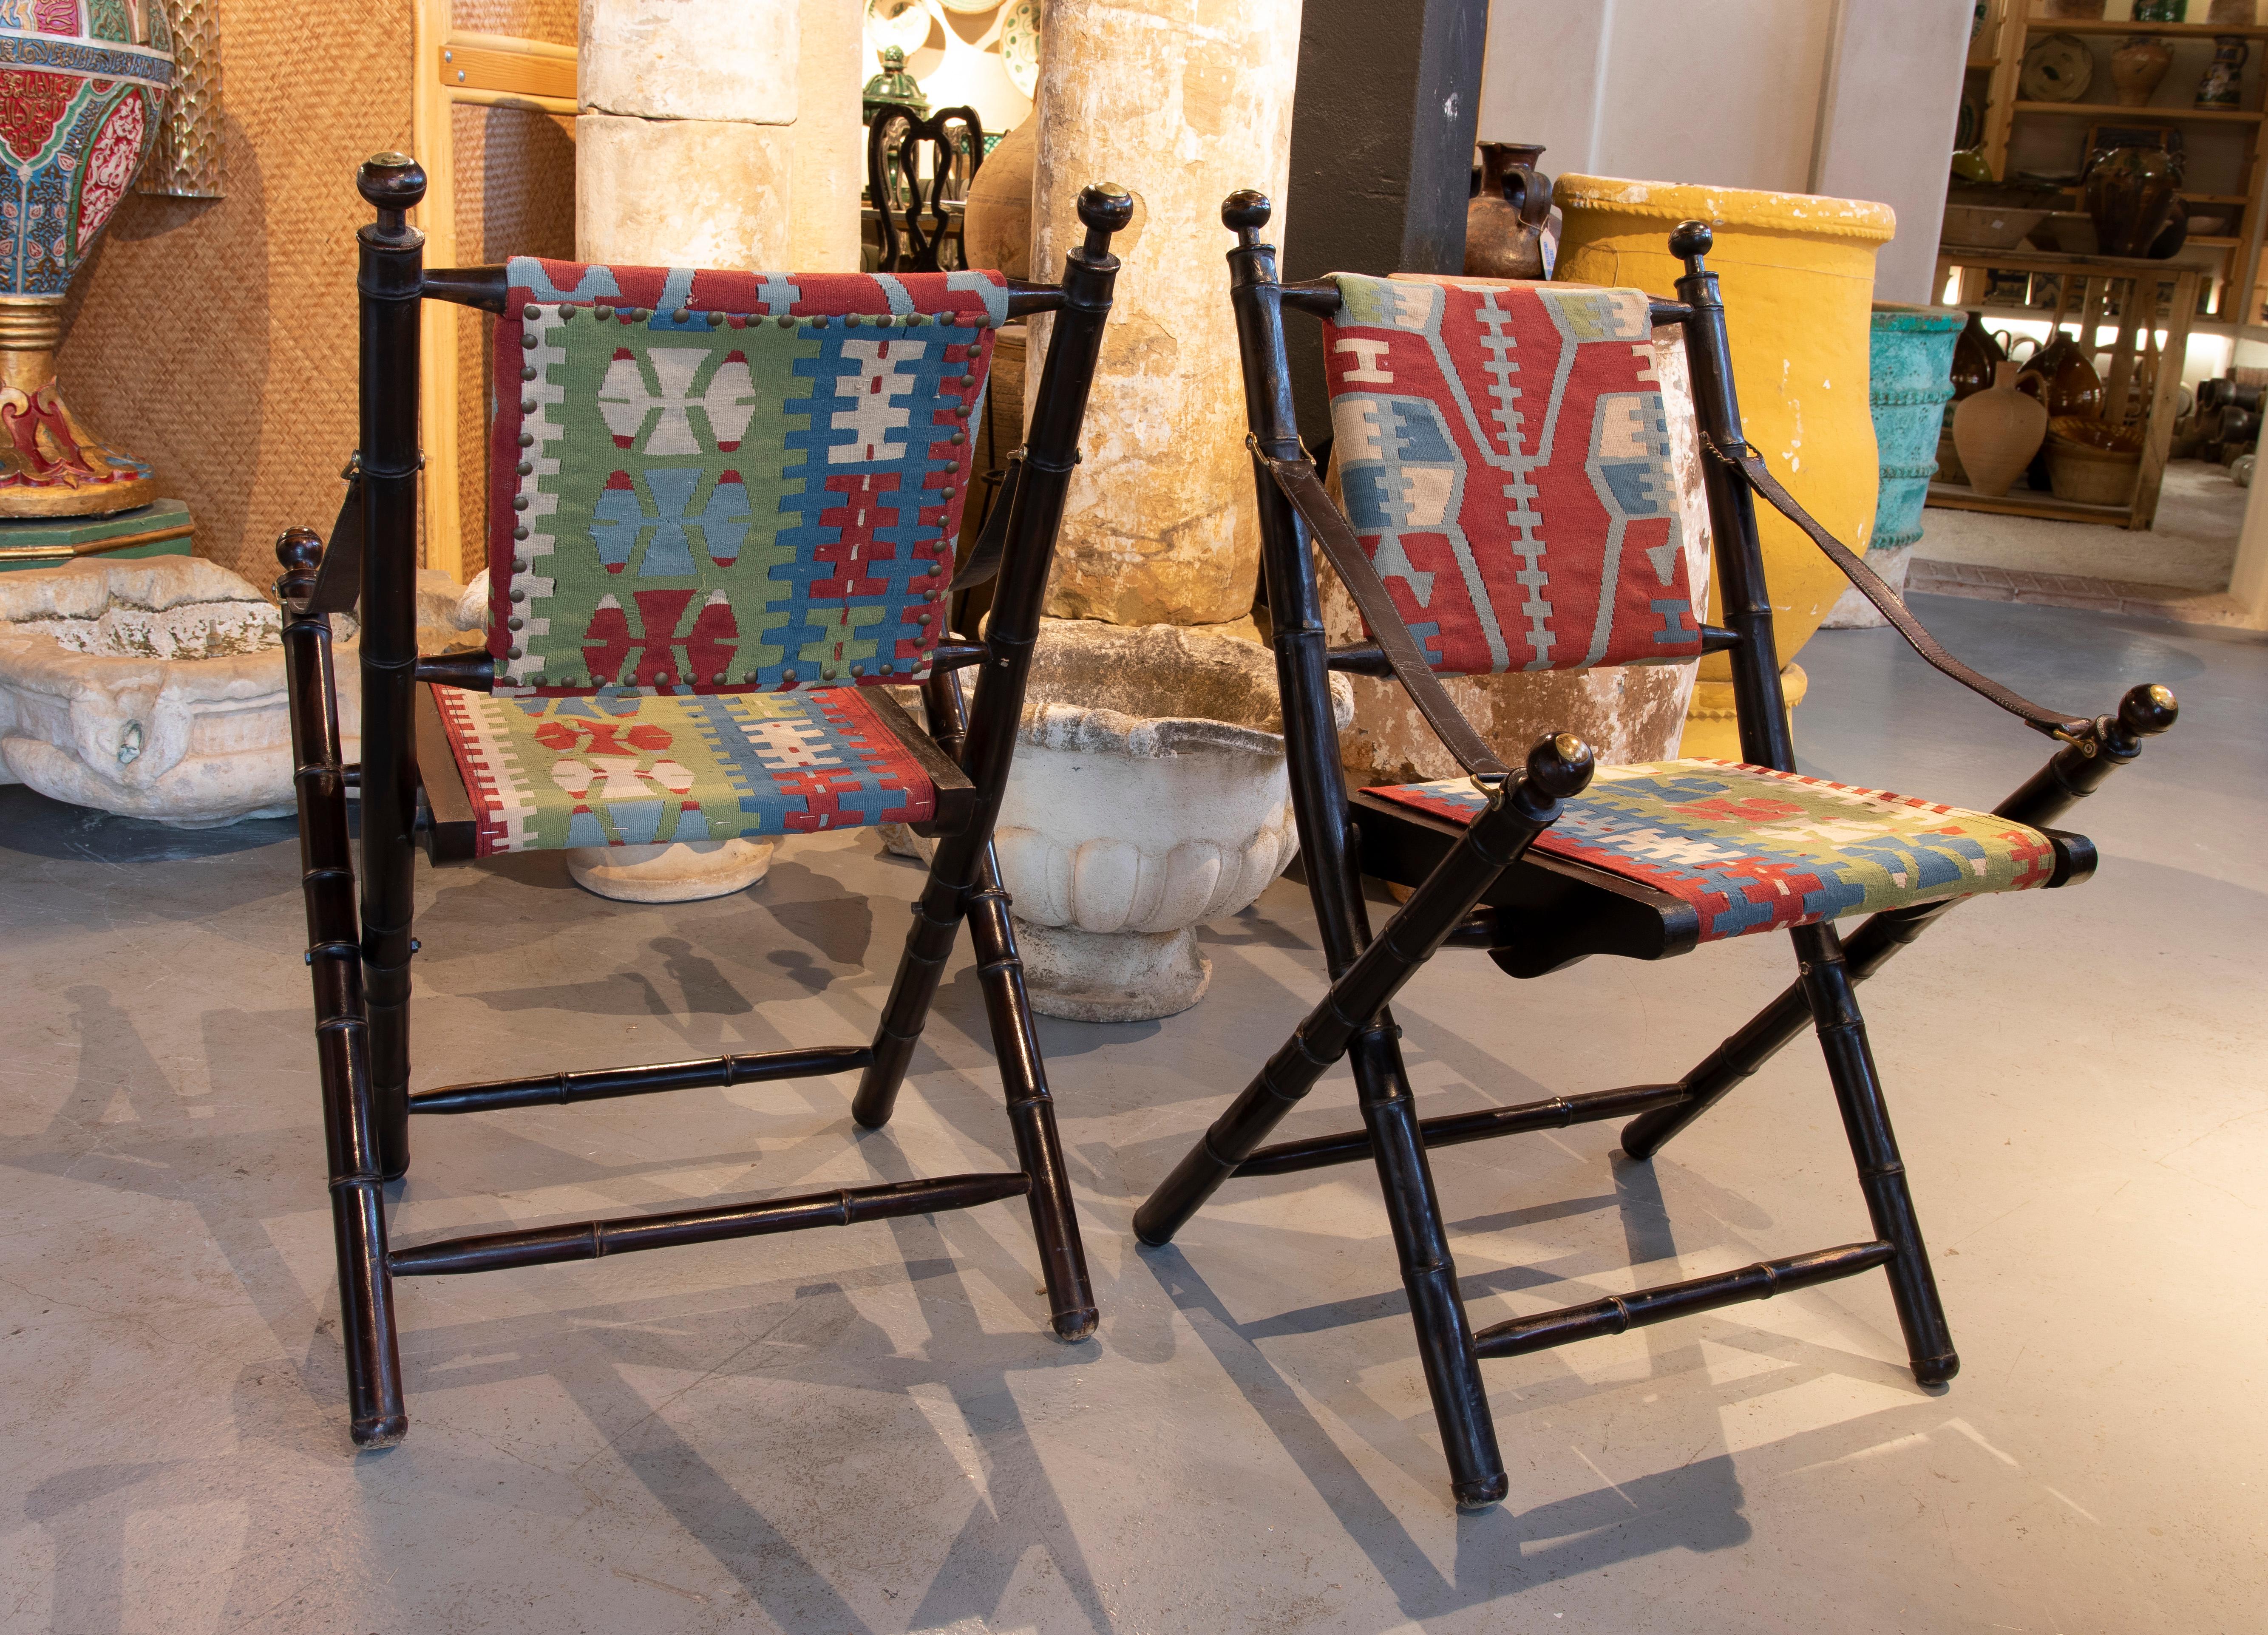 Late 20th Century Pair of Leather Folding Chairs with Hand-Stitched Kilim Seat and Backrest